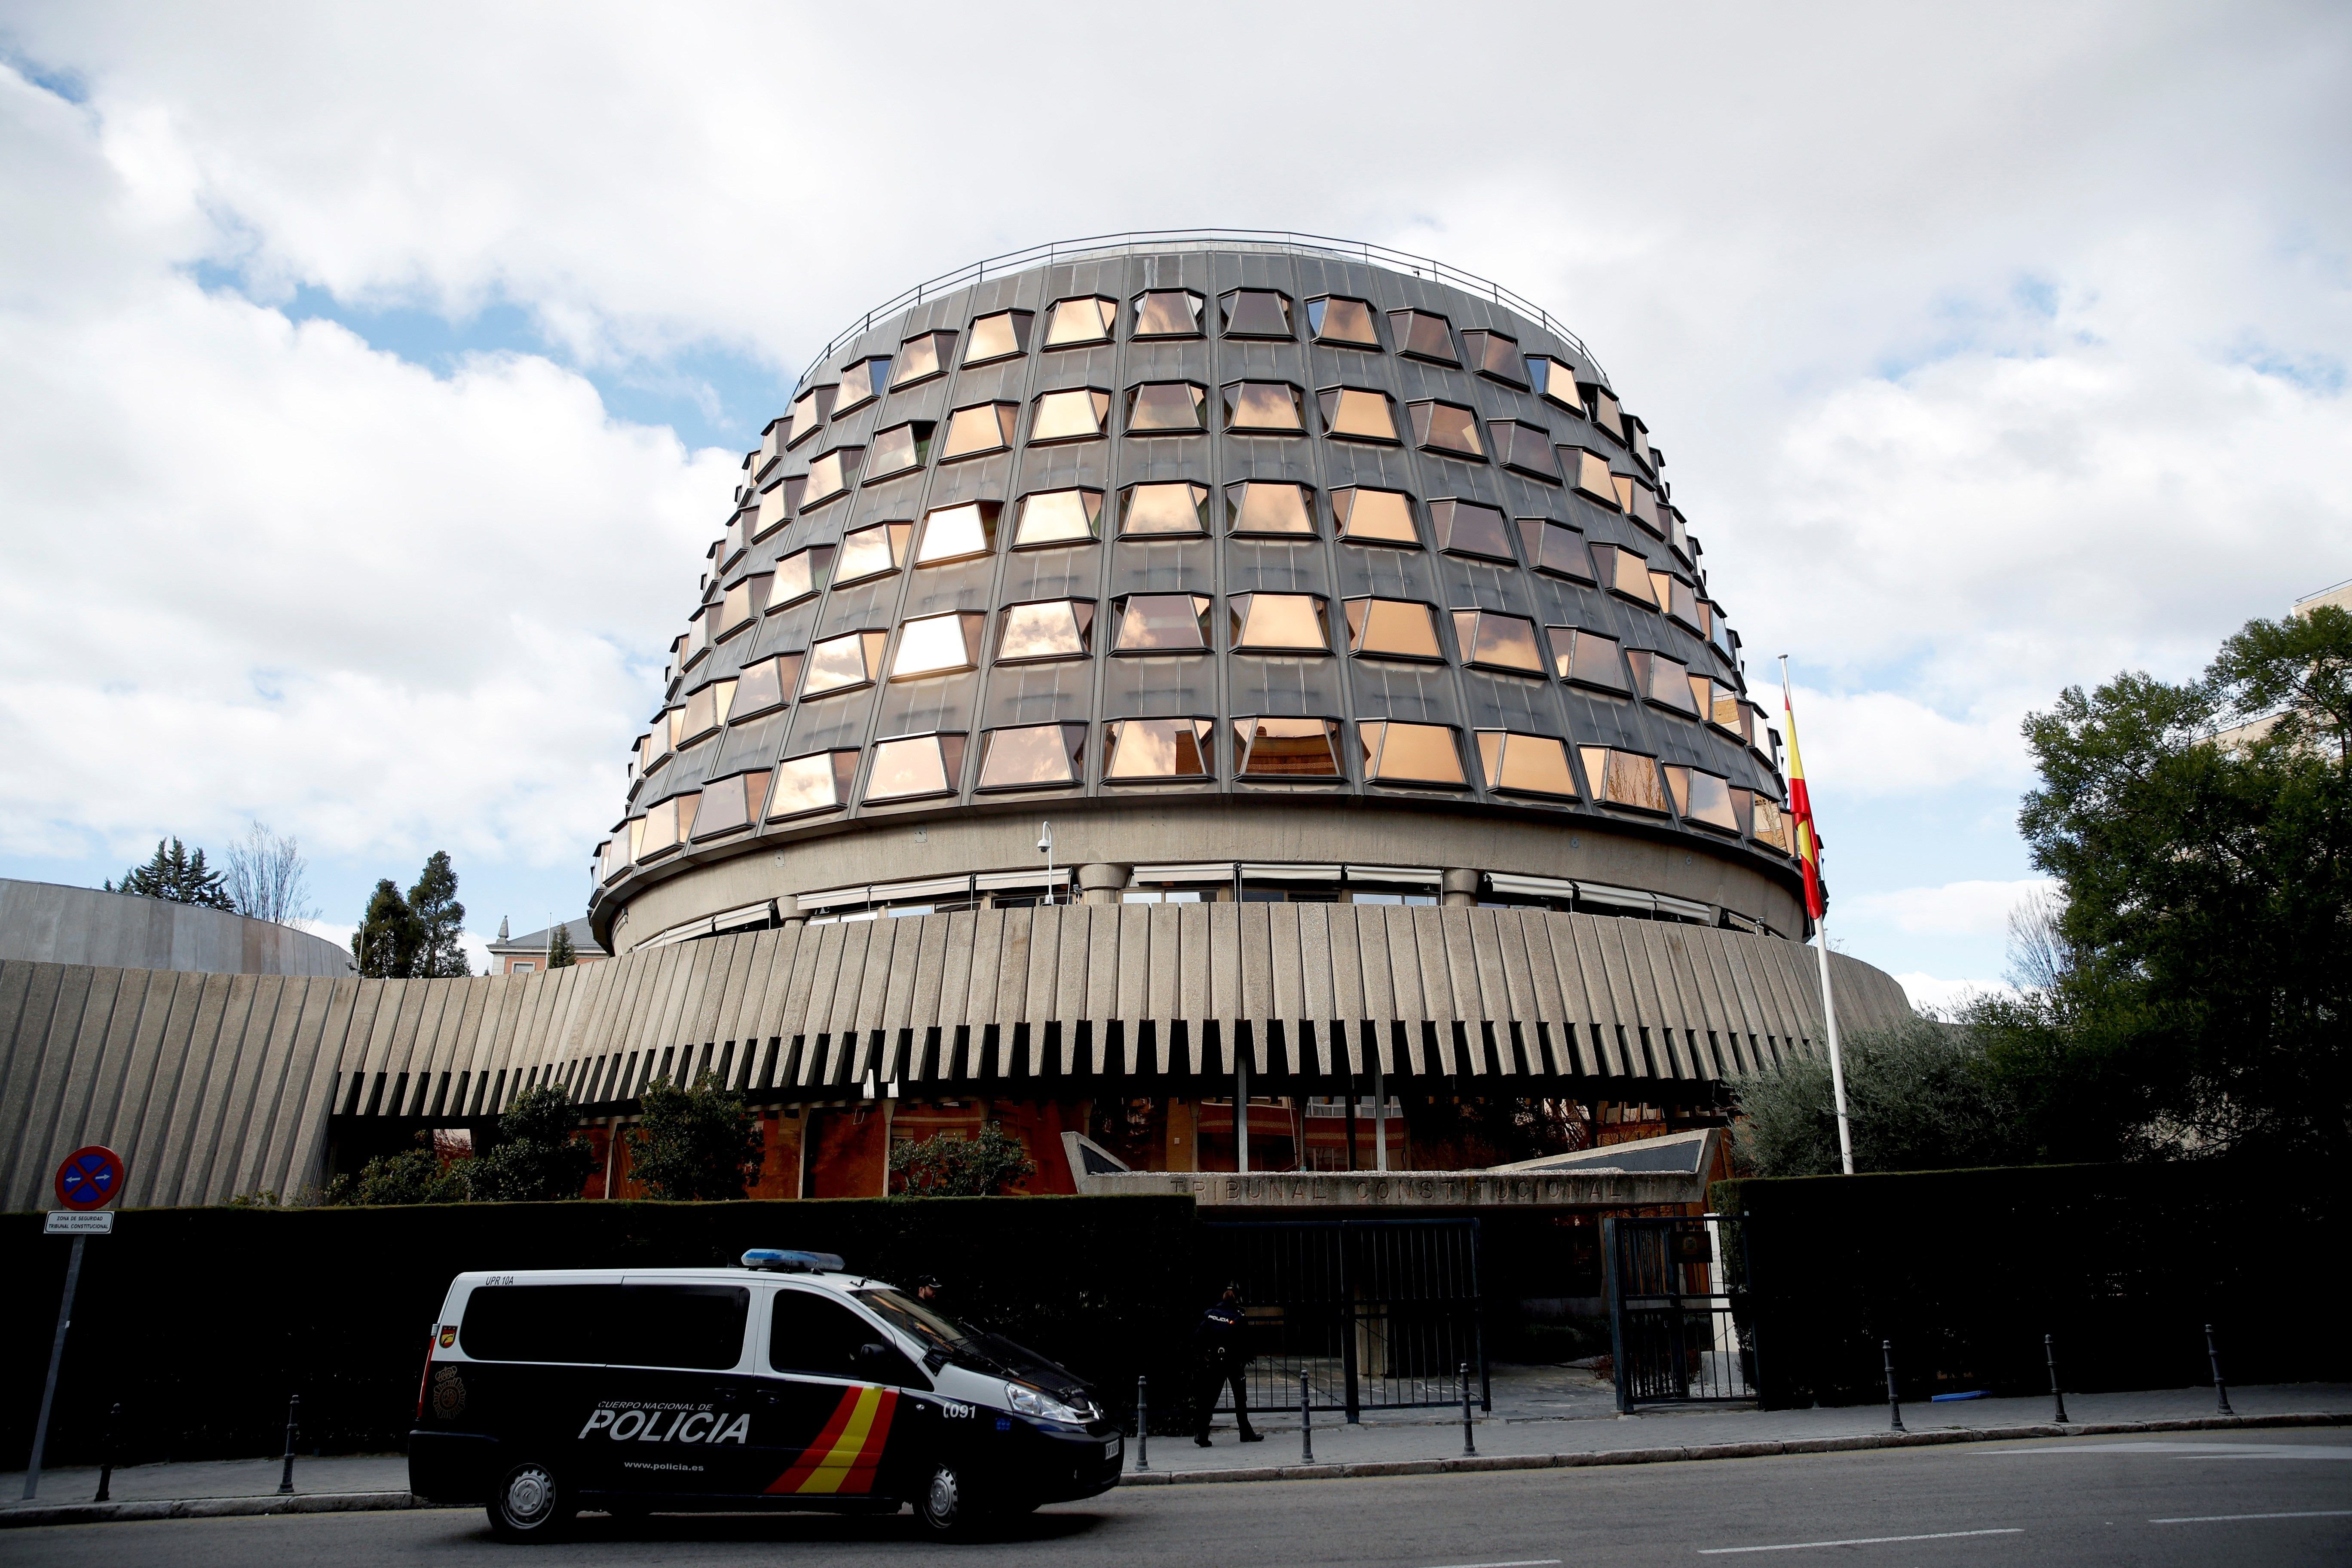 Spanish Constitutional Court suspends Puigdemont's candidacy for president